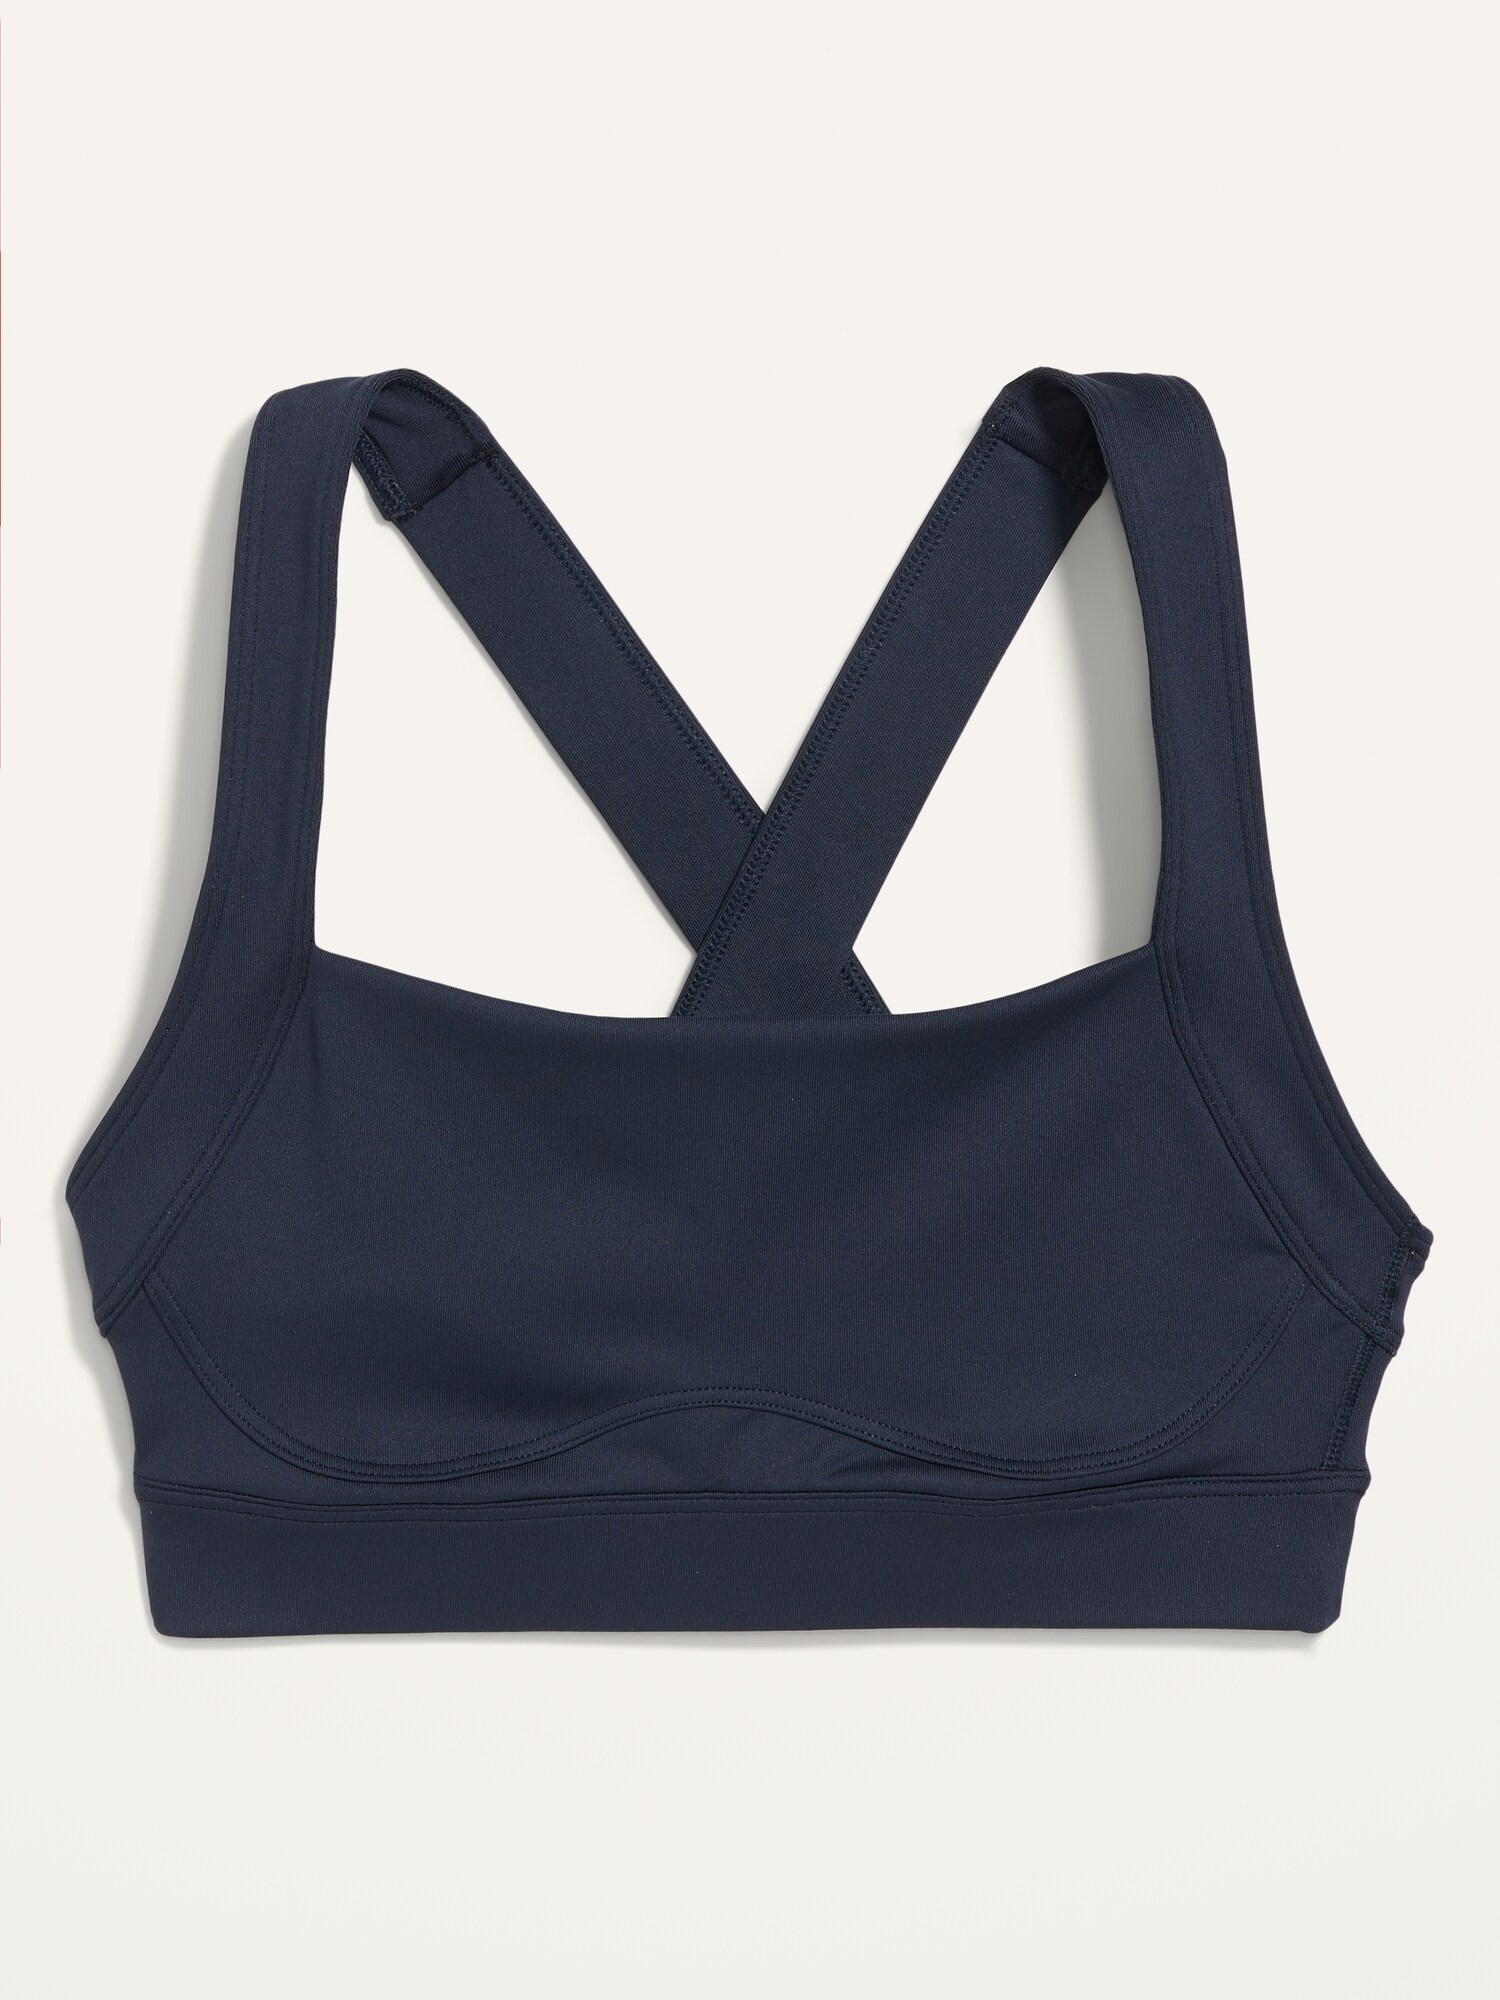 High Support Cross-Back Sports Bra for Women XS-XXL | Old Navy